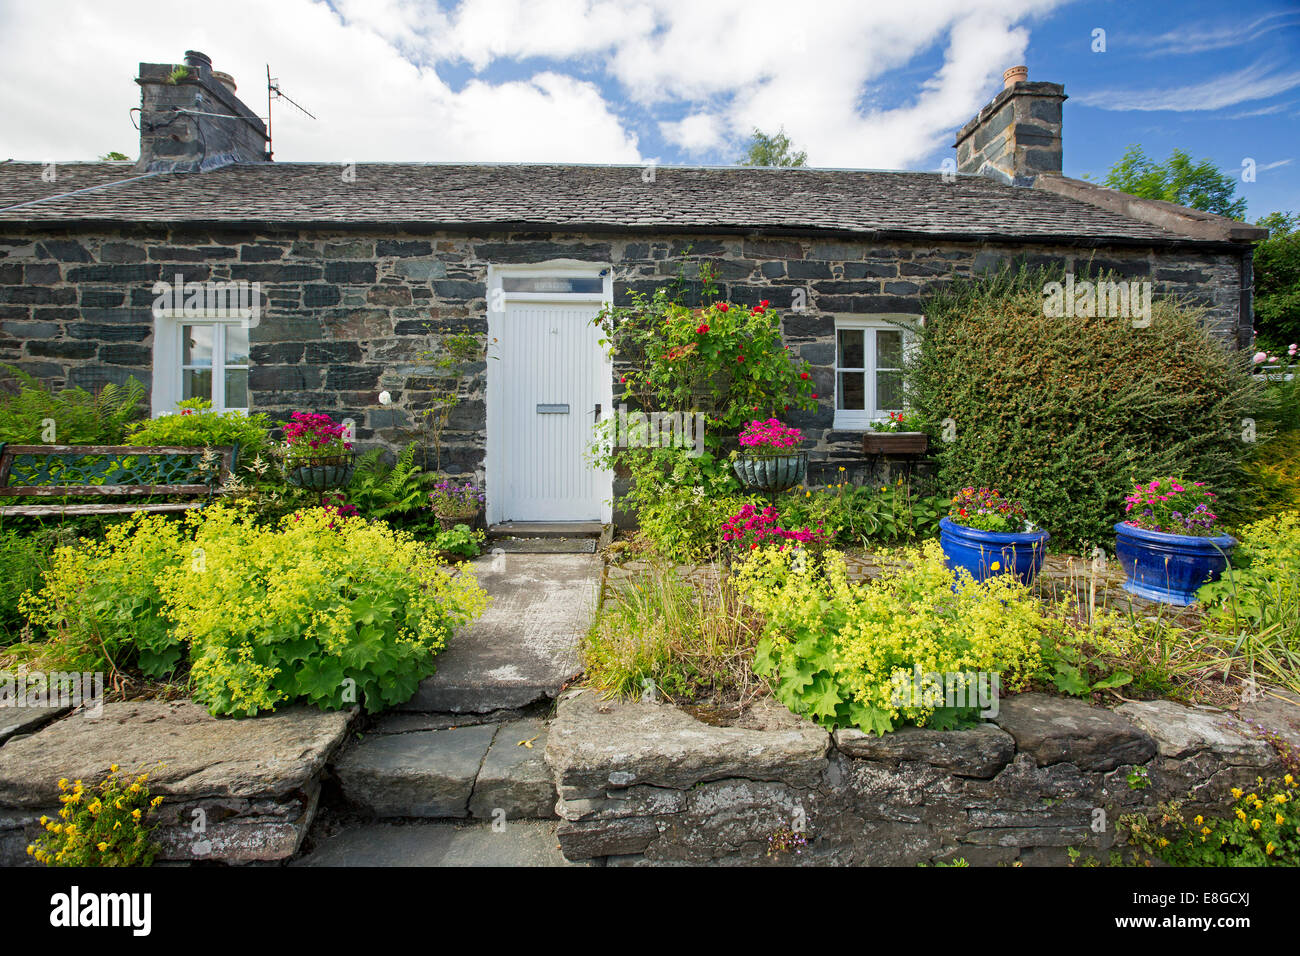 Small stone cottage with rock wall, steps, and pathway through colourful garden at village of Pitlochry, Scotland Stock Photo